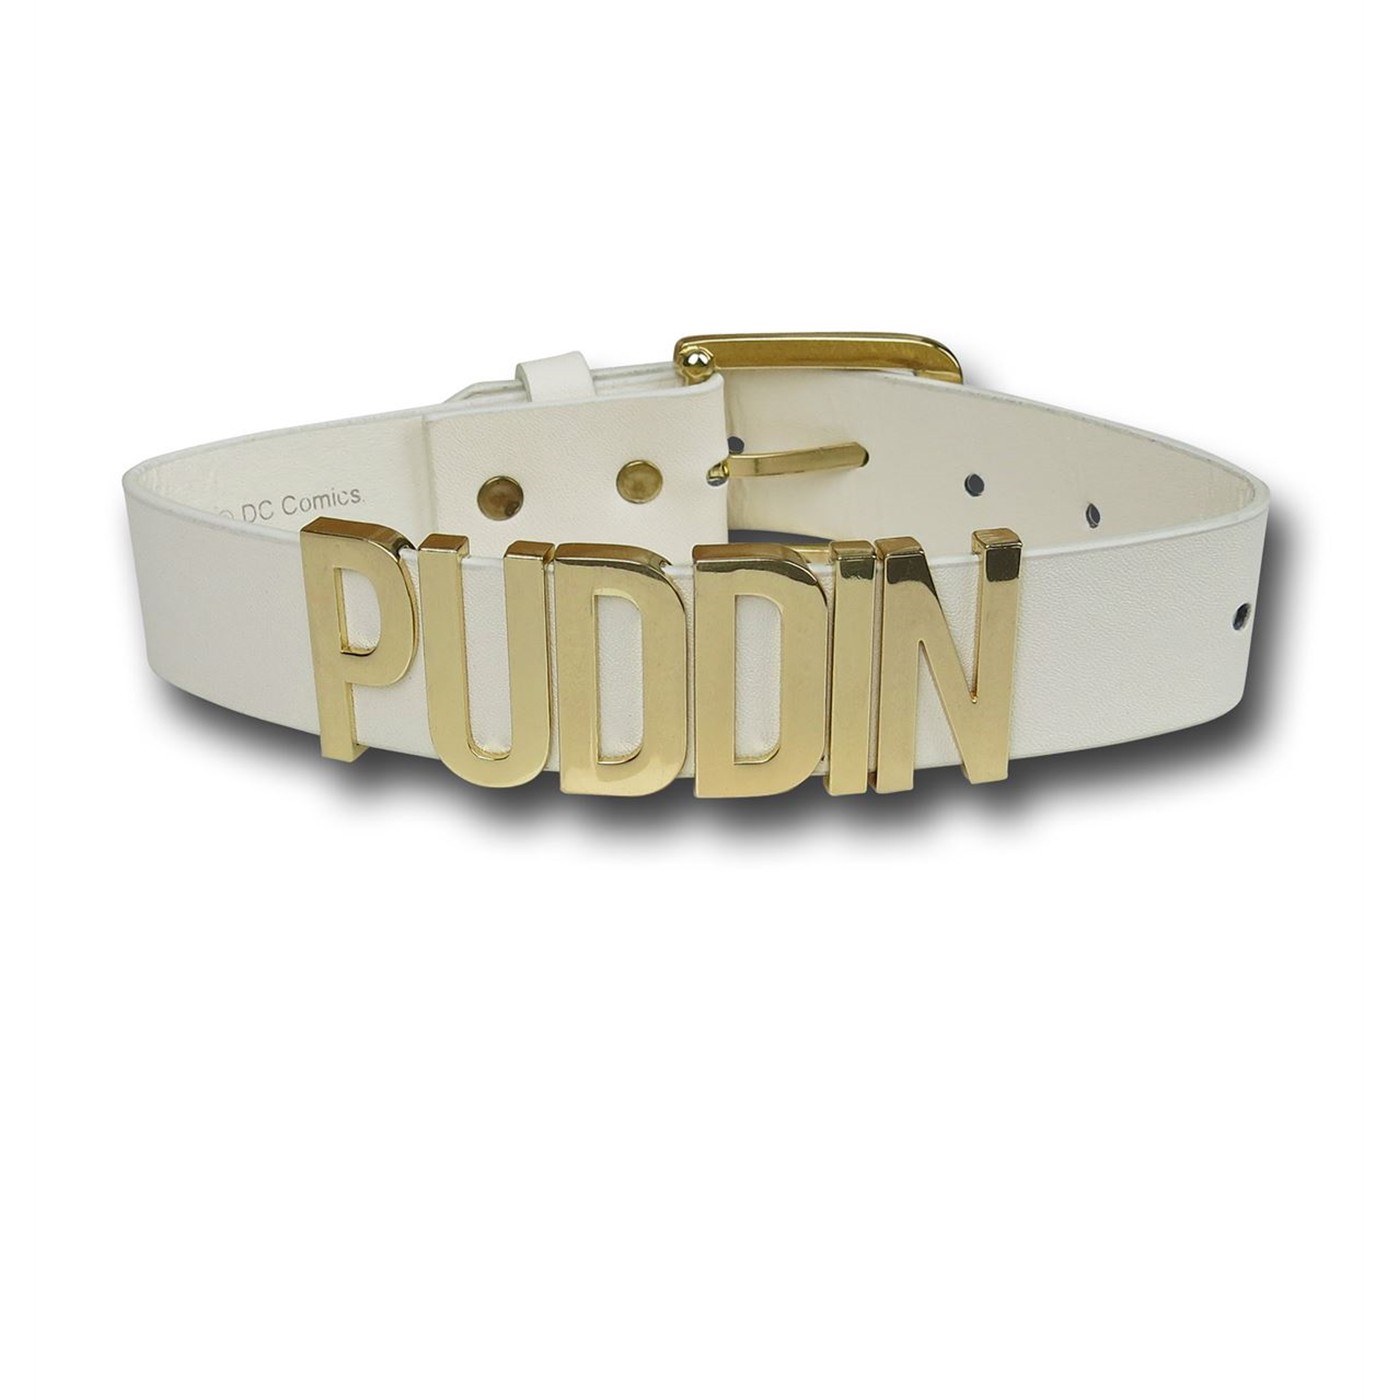 Suicide Squad Harley Quinn Puddin Choker